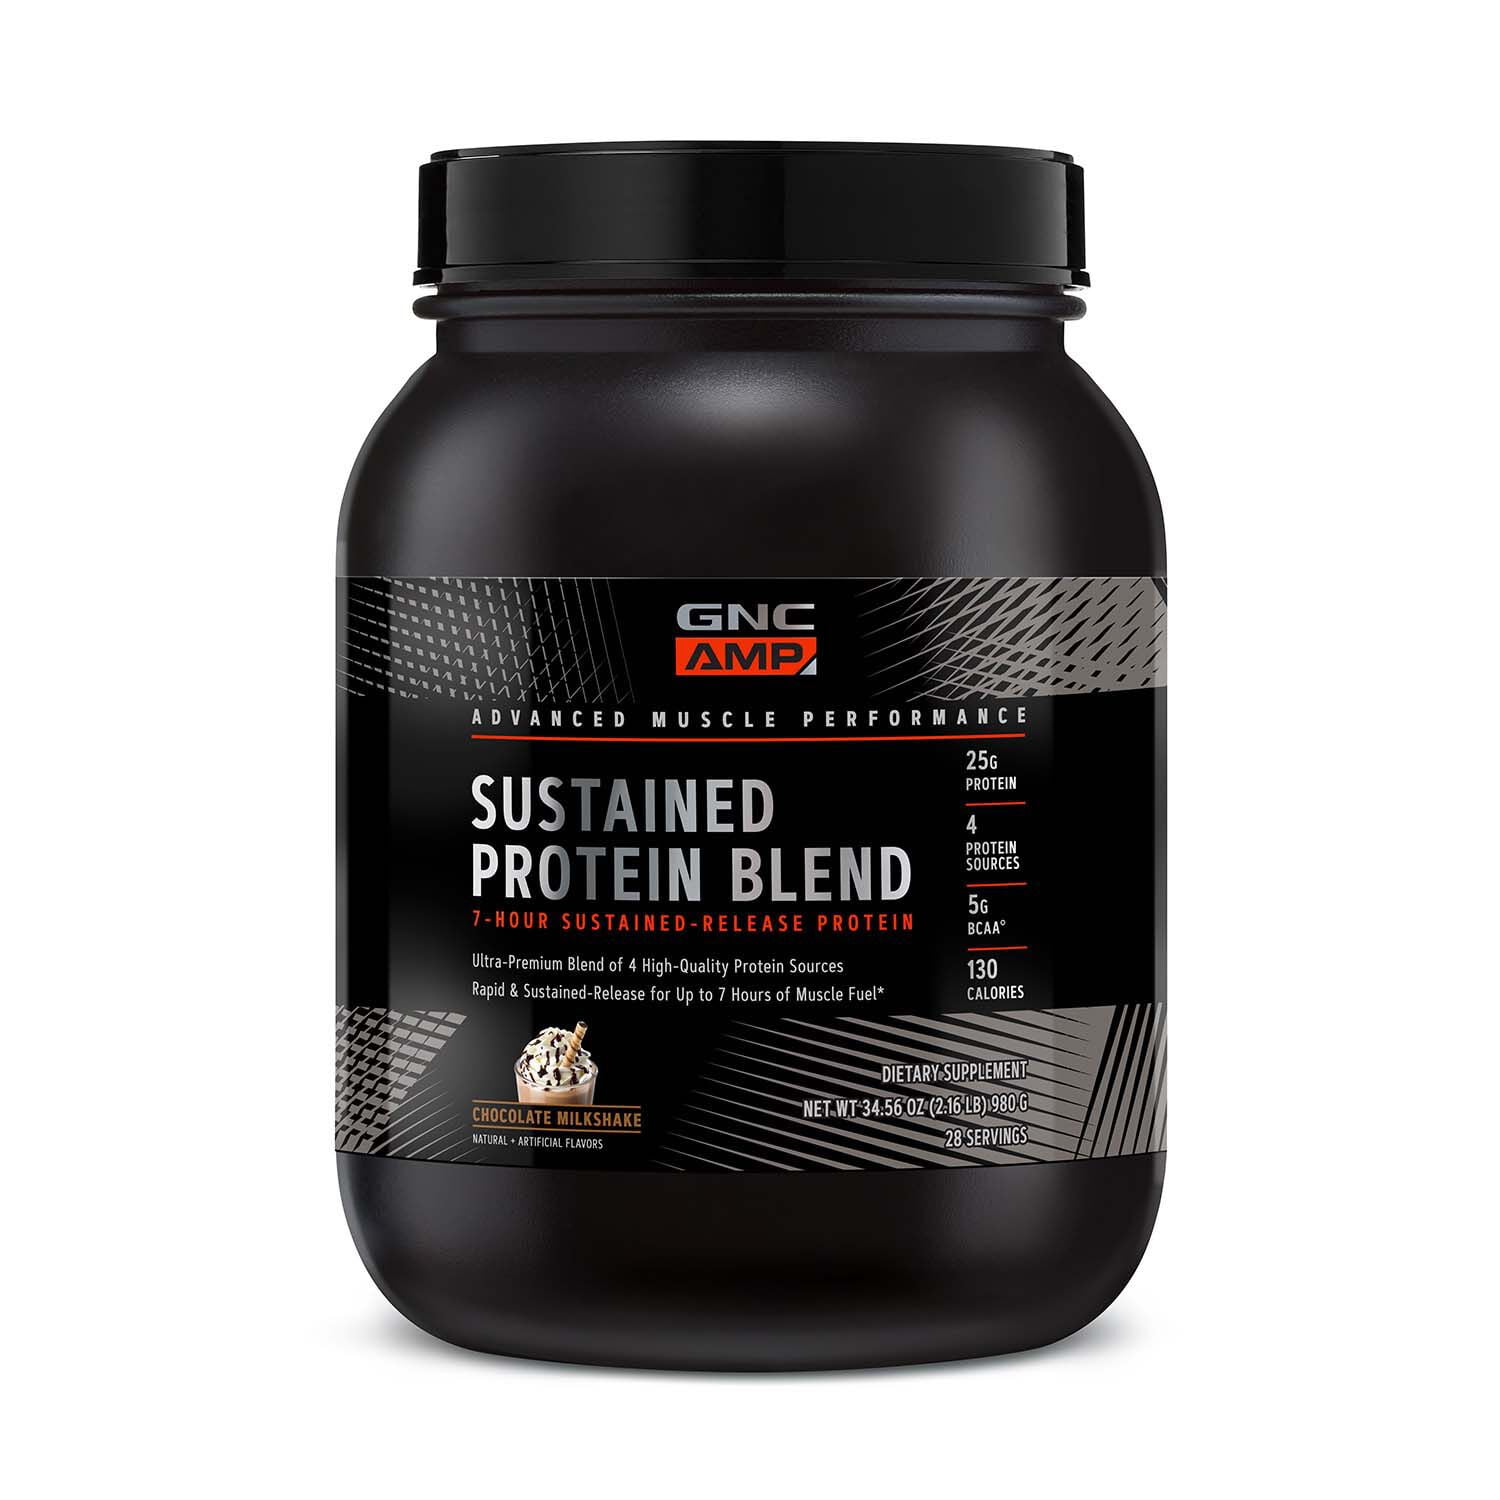 GNC AMP Sustained Protein Blend - Chocolate Milkshake, 28 Servings,  High-Quality 